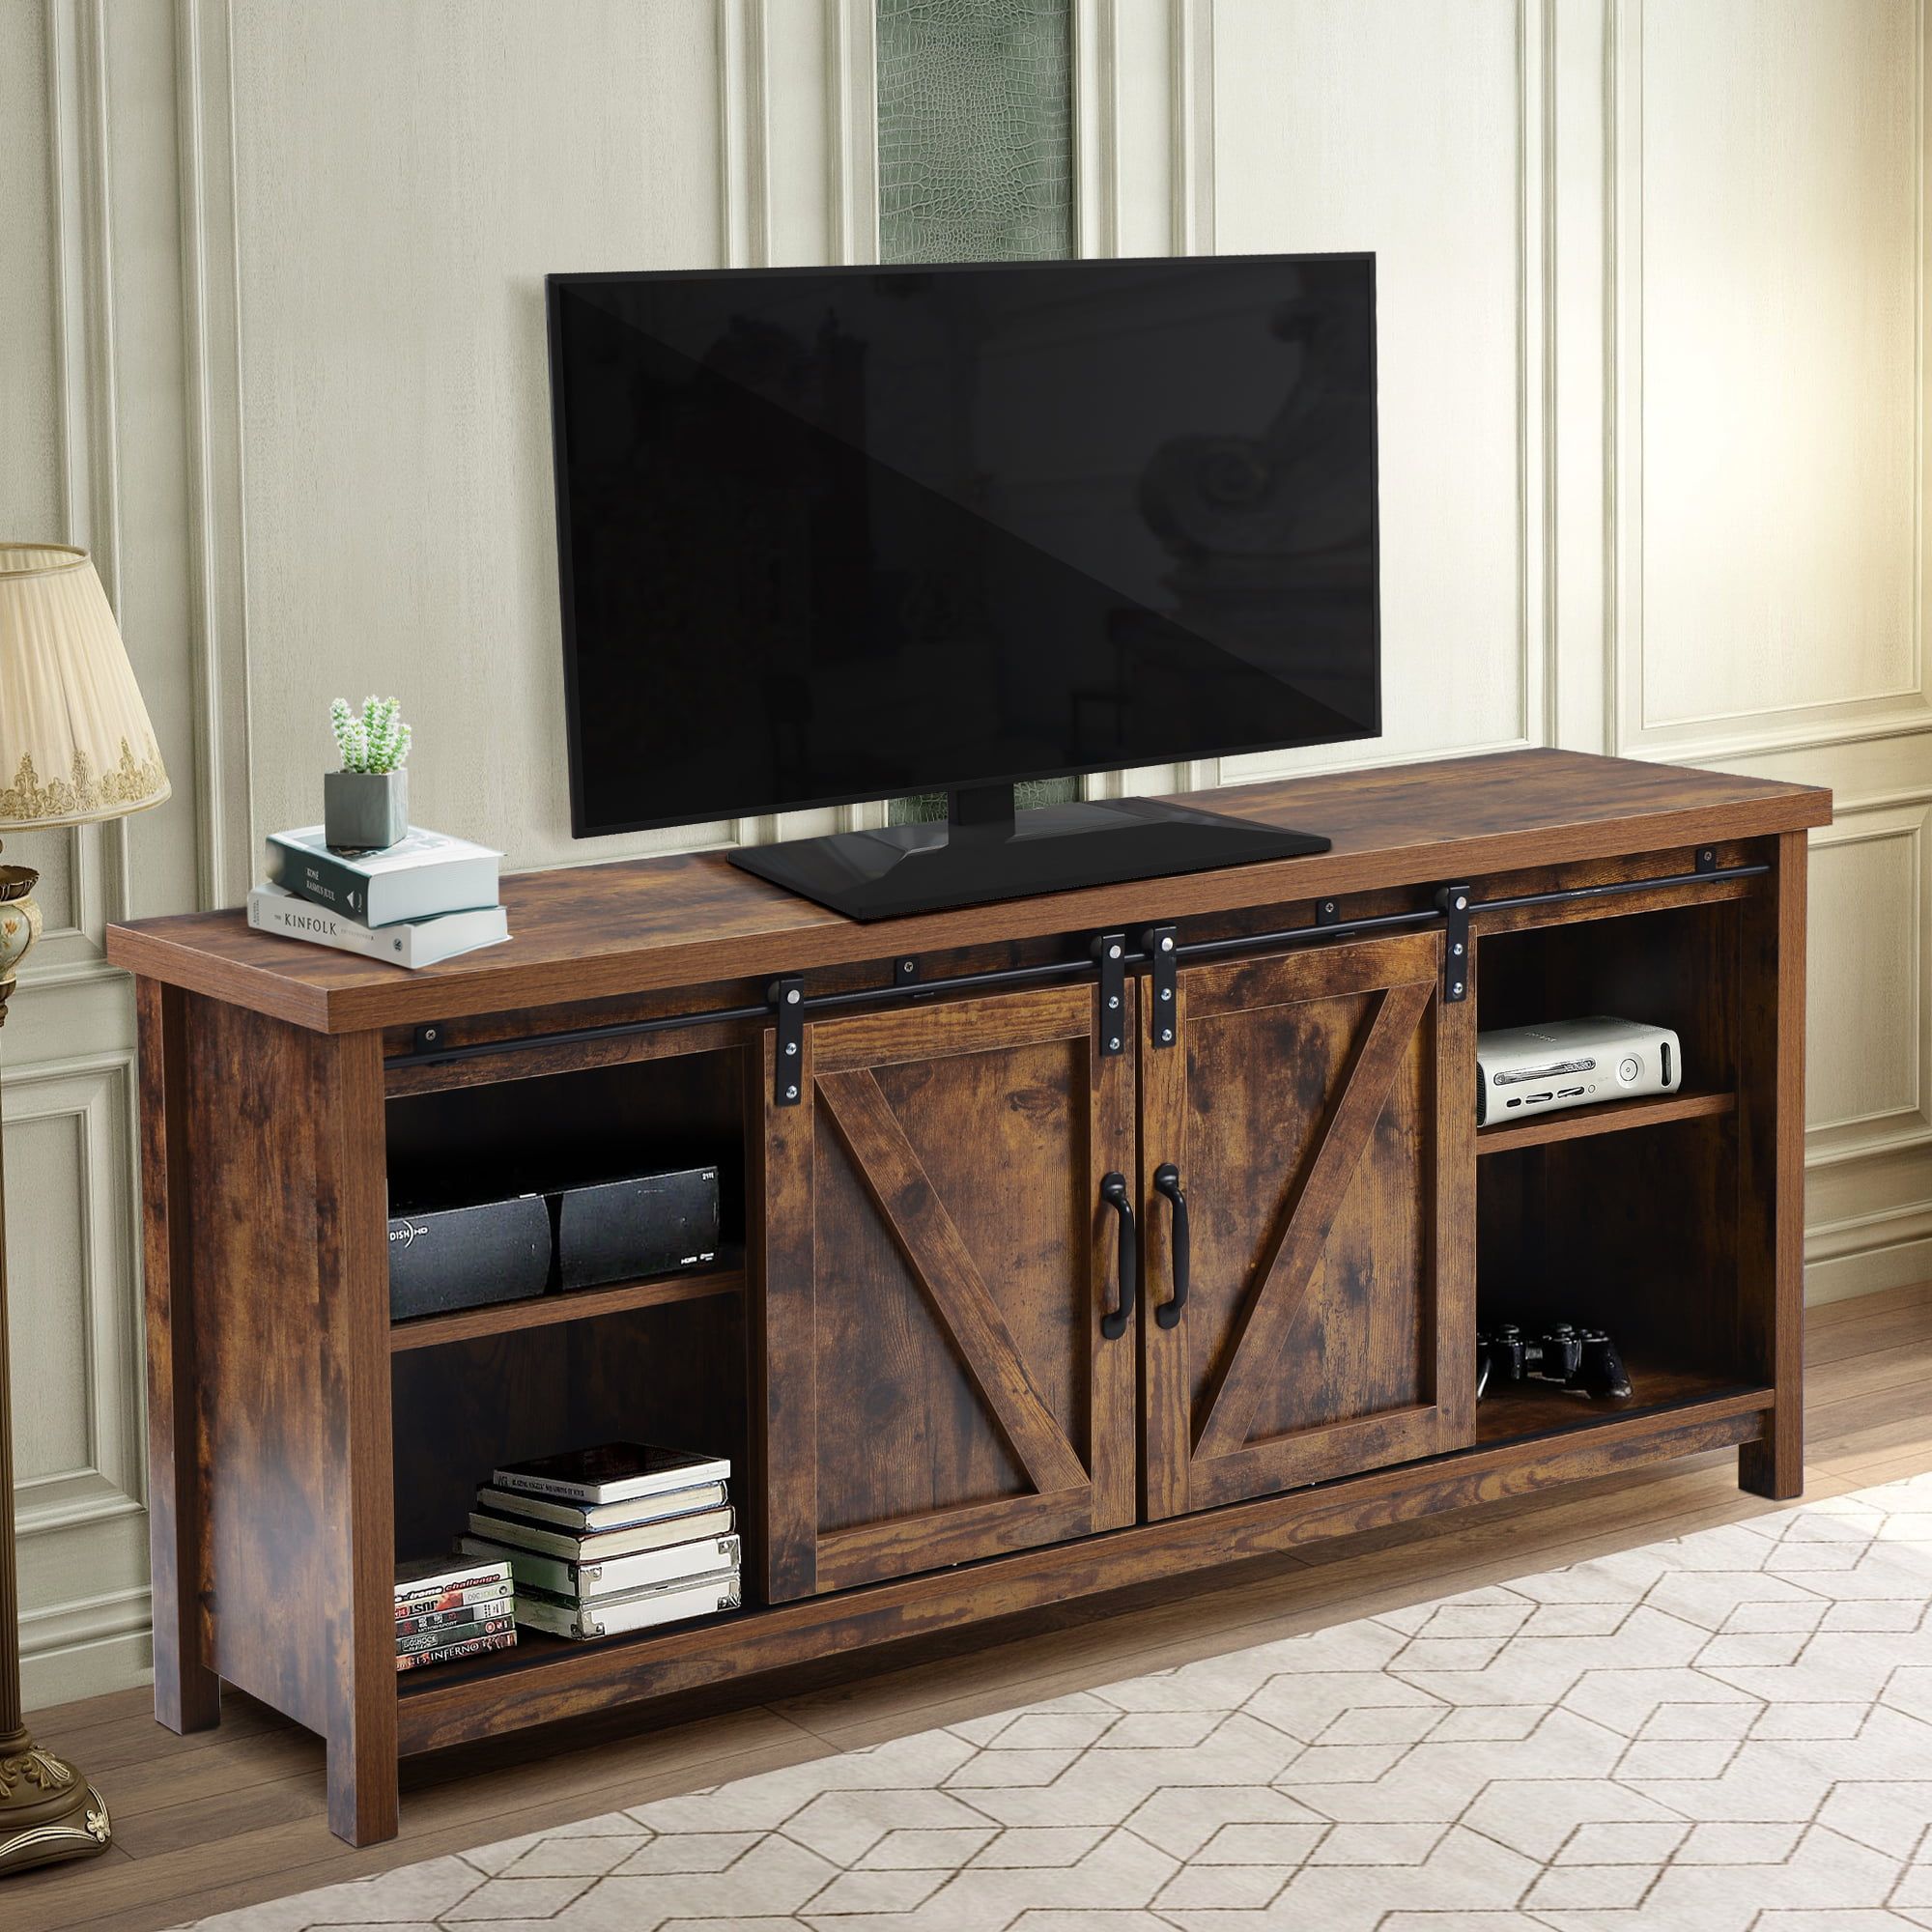 Buy Farmhouse 52'' Tv Stands With Adjustable Leg, Segmart Traditional With Regard To Farmhouse Rattan Tv Stands (View 19 of 20)